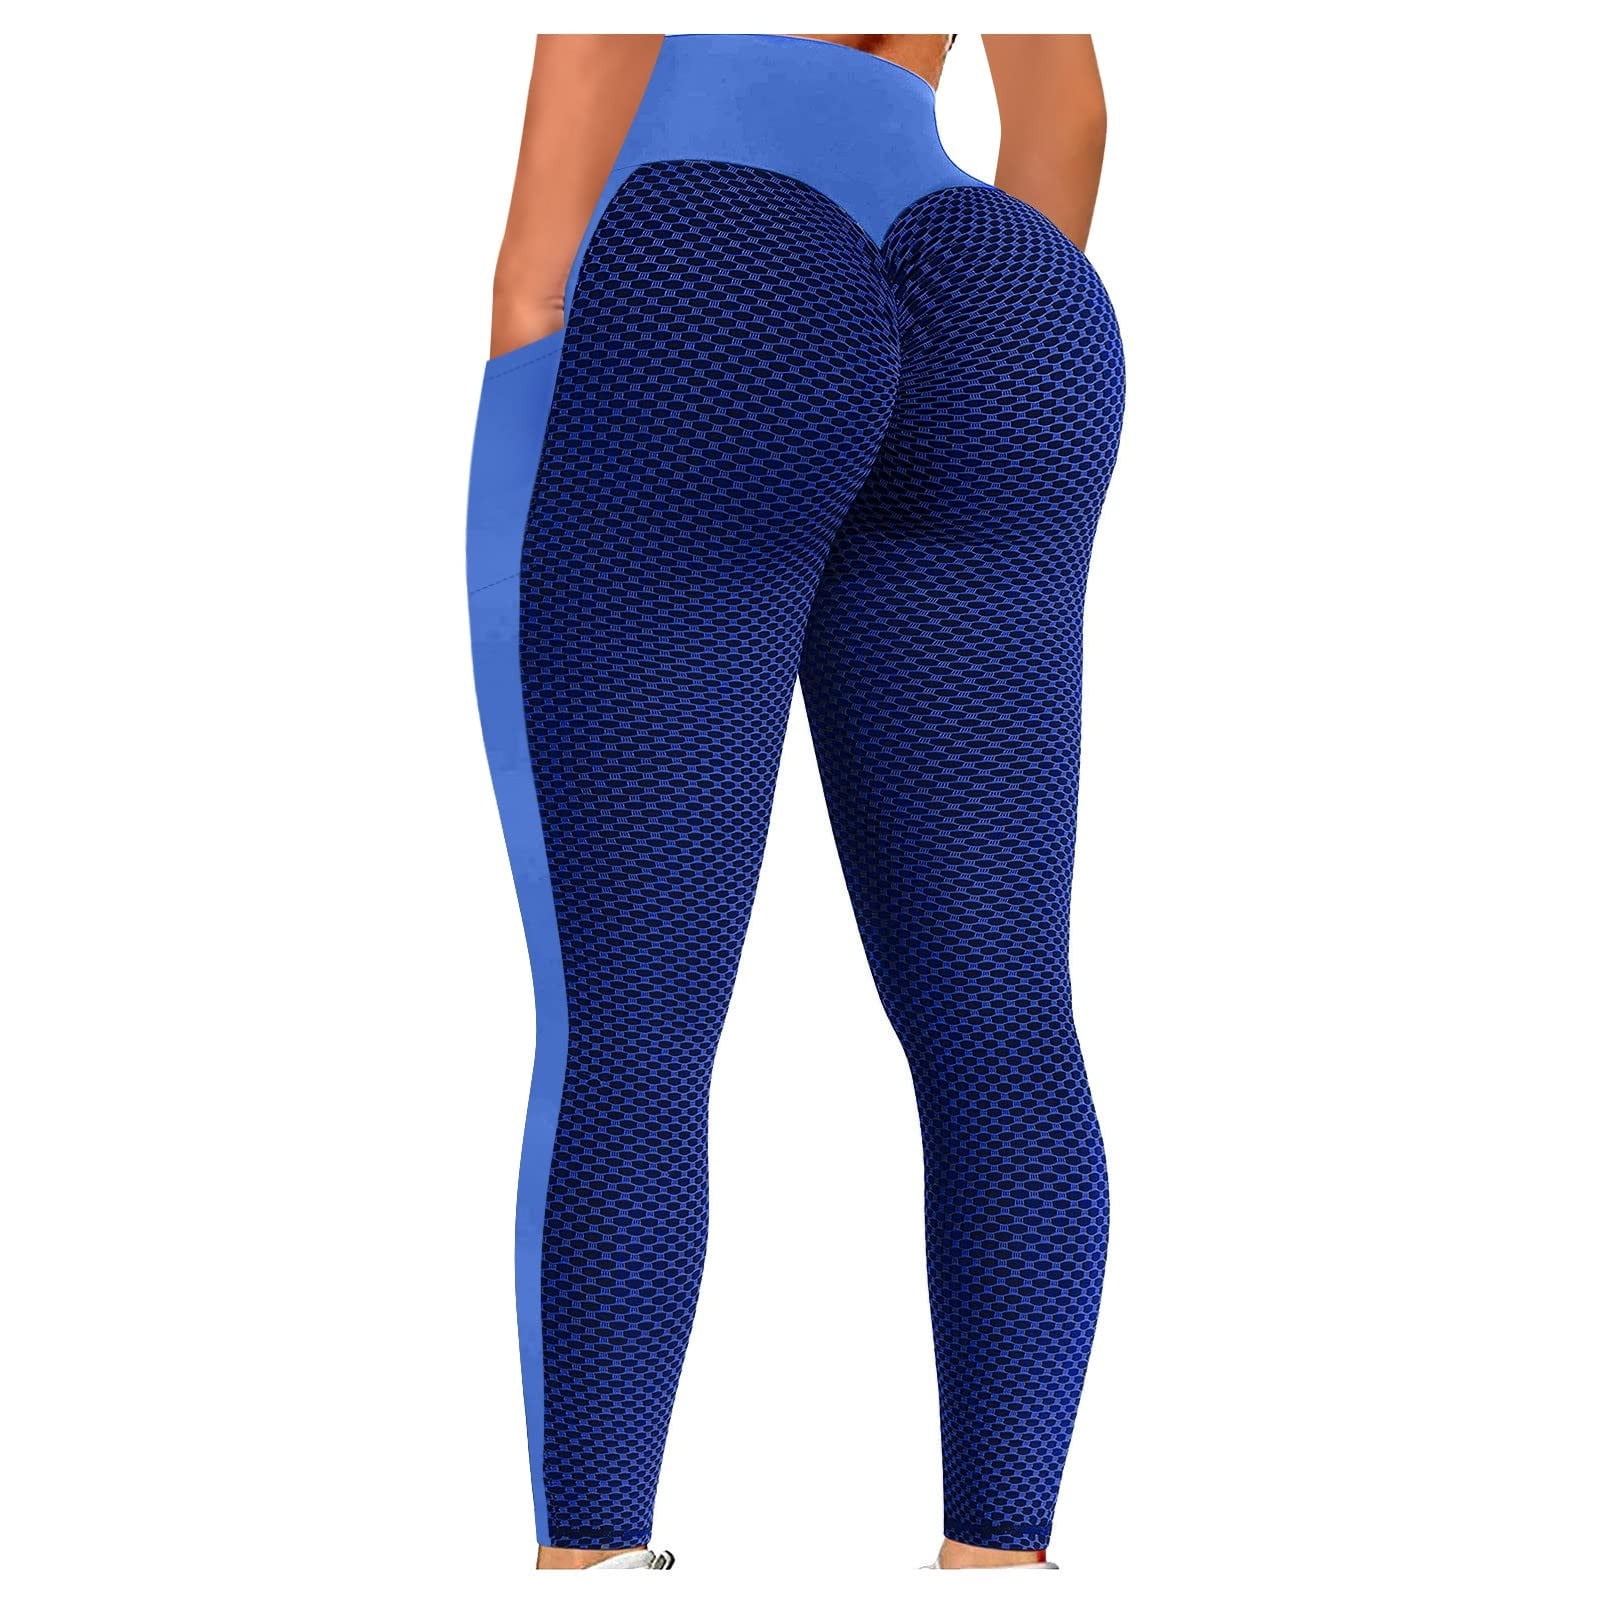 XMMSWDLA Women'S High Waist Yoga Pants Tummy Control Workout Ruched Butt  Lifting Stretchy Leggings Textured Booty Tights Tights for Women Under Dress  